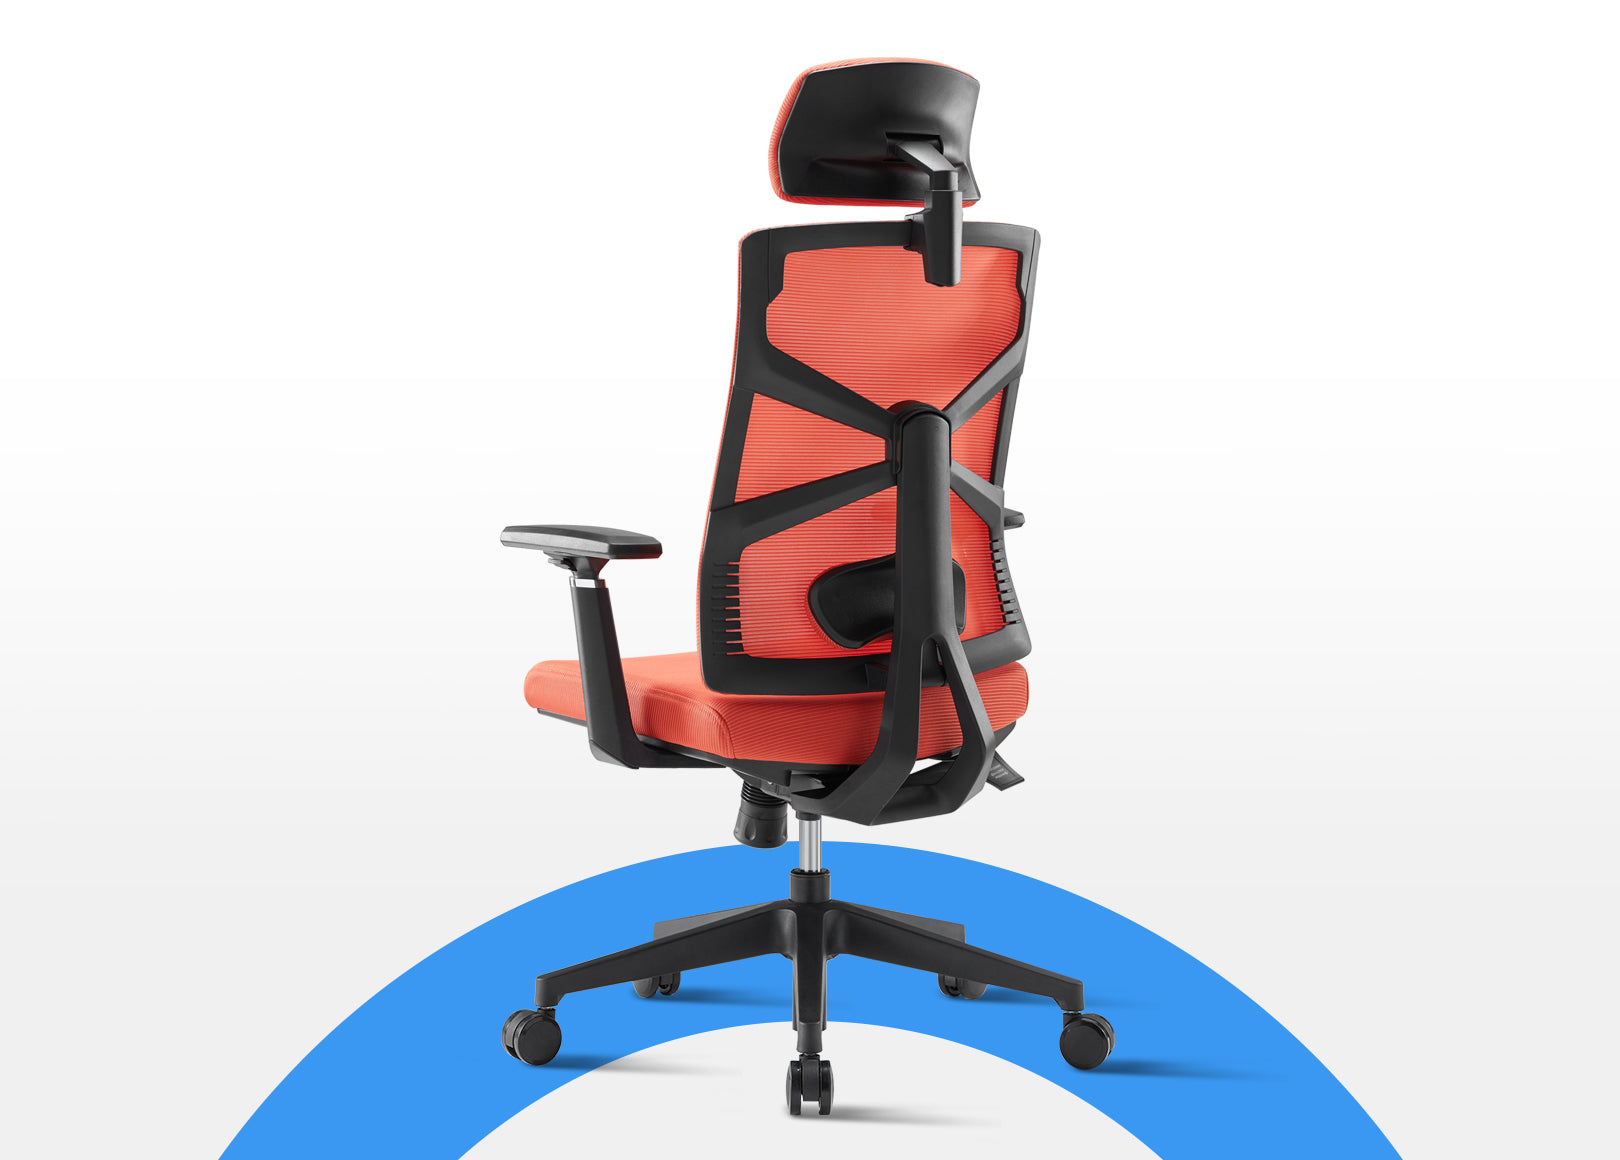 Boost Productivity and Health with Orange Voyager Pro Ergonomic Task Chair: 3D Armrests, Lockable Backrest, Adjustable Seat Depth and Lumbar Support